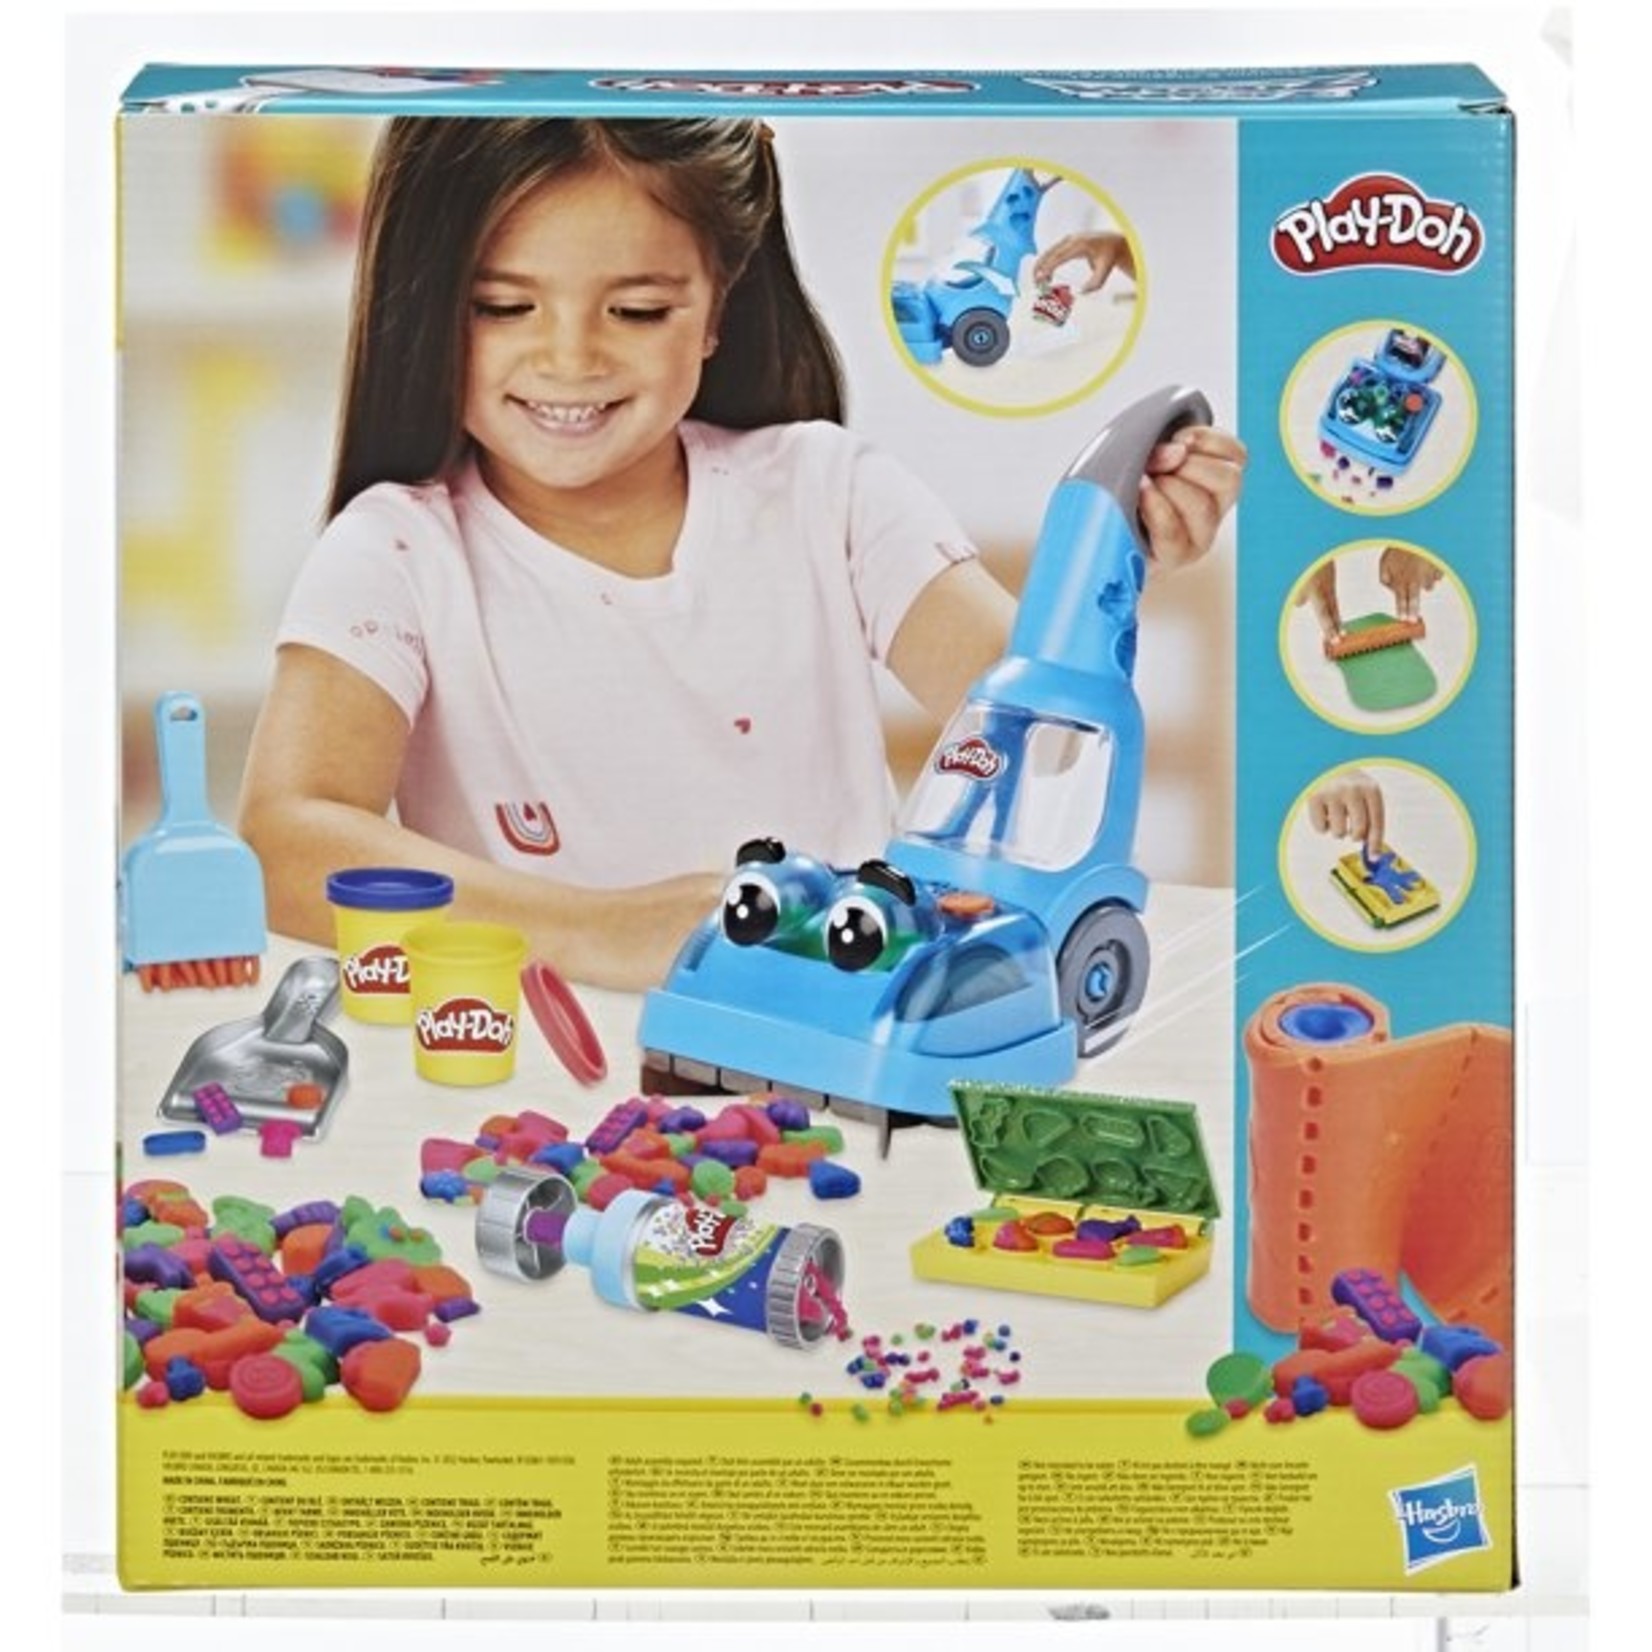 Play-Doh Zoom Zoom Vacuum Cleaner and Cleanup Set